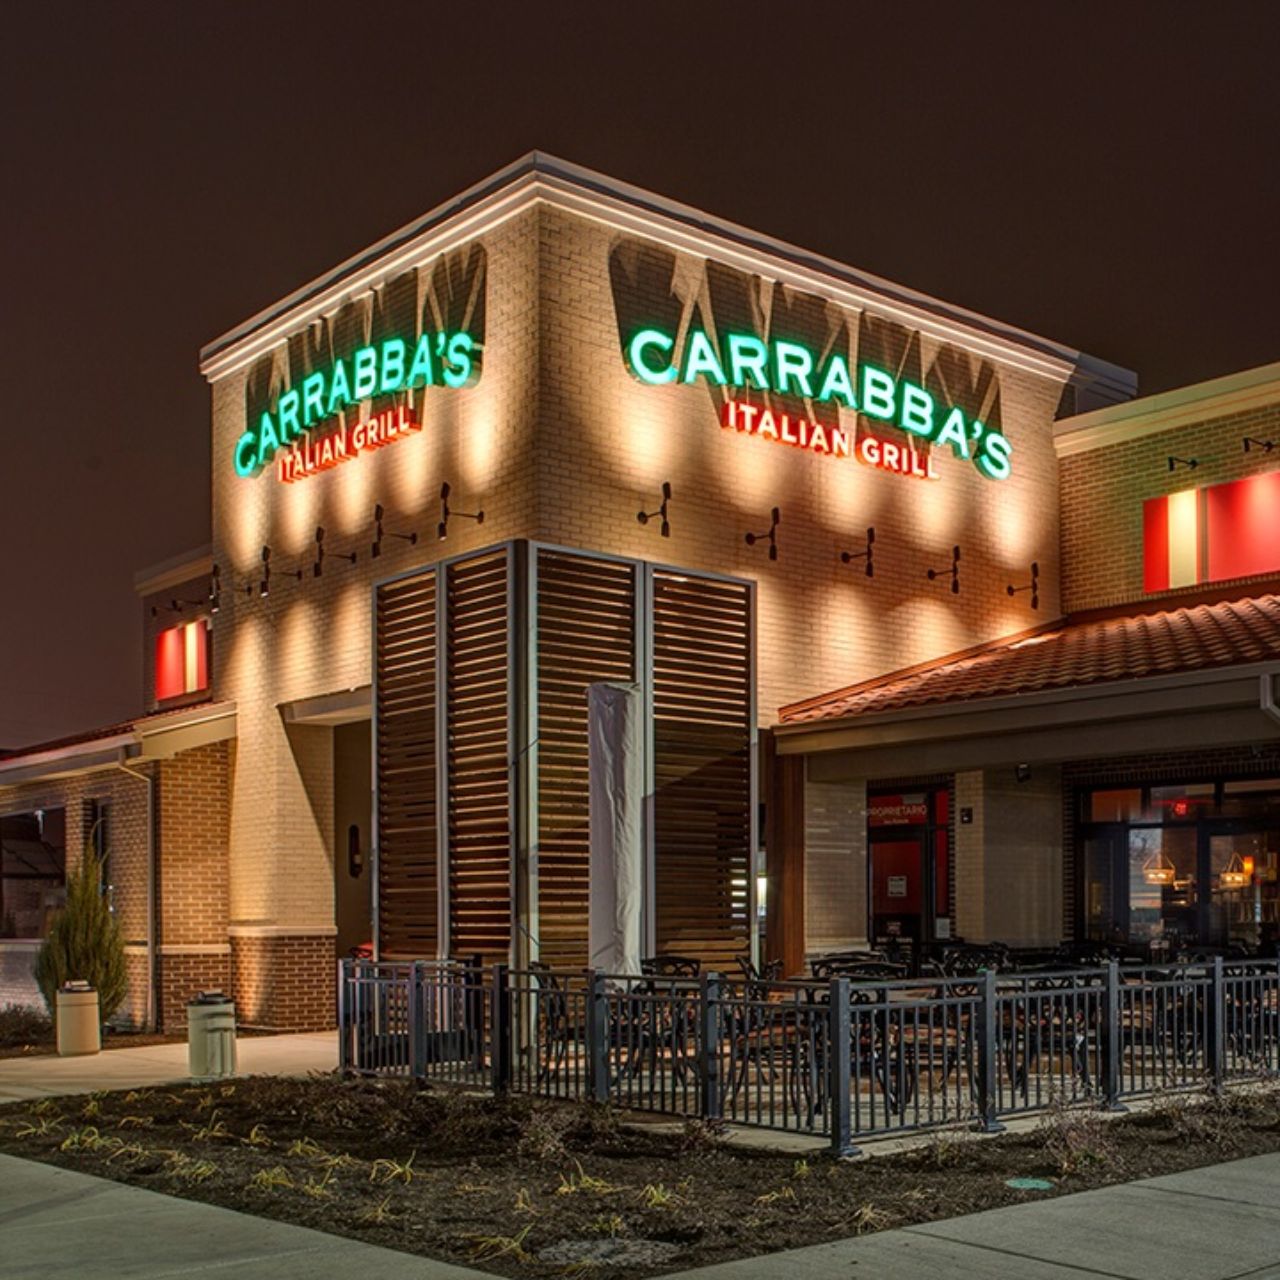 Carrabbas Italian Grill menu prices featuring 188 items ranging from $3.00 to $75.00